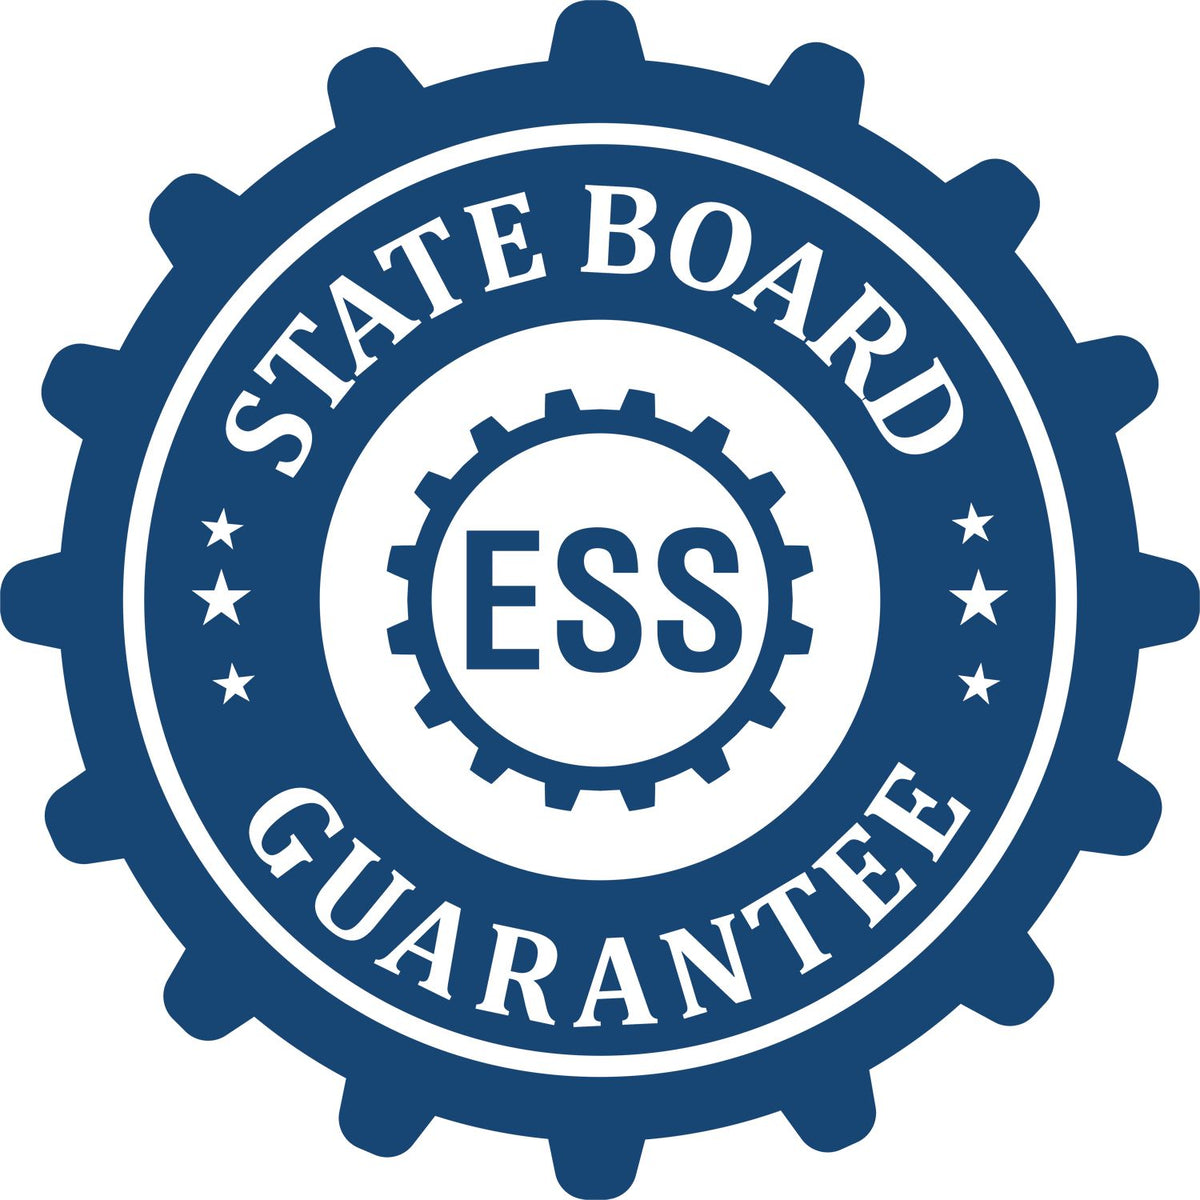 An emblem in a gear shape illustrating a state board guarantee for the Florida Geologist Desk Seal